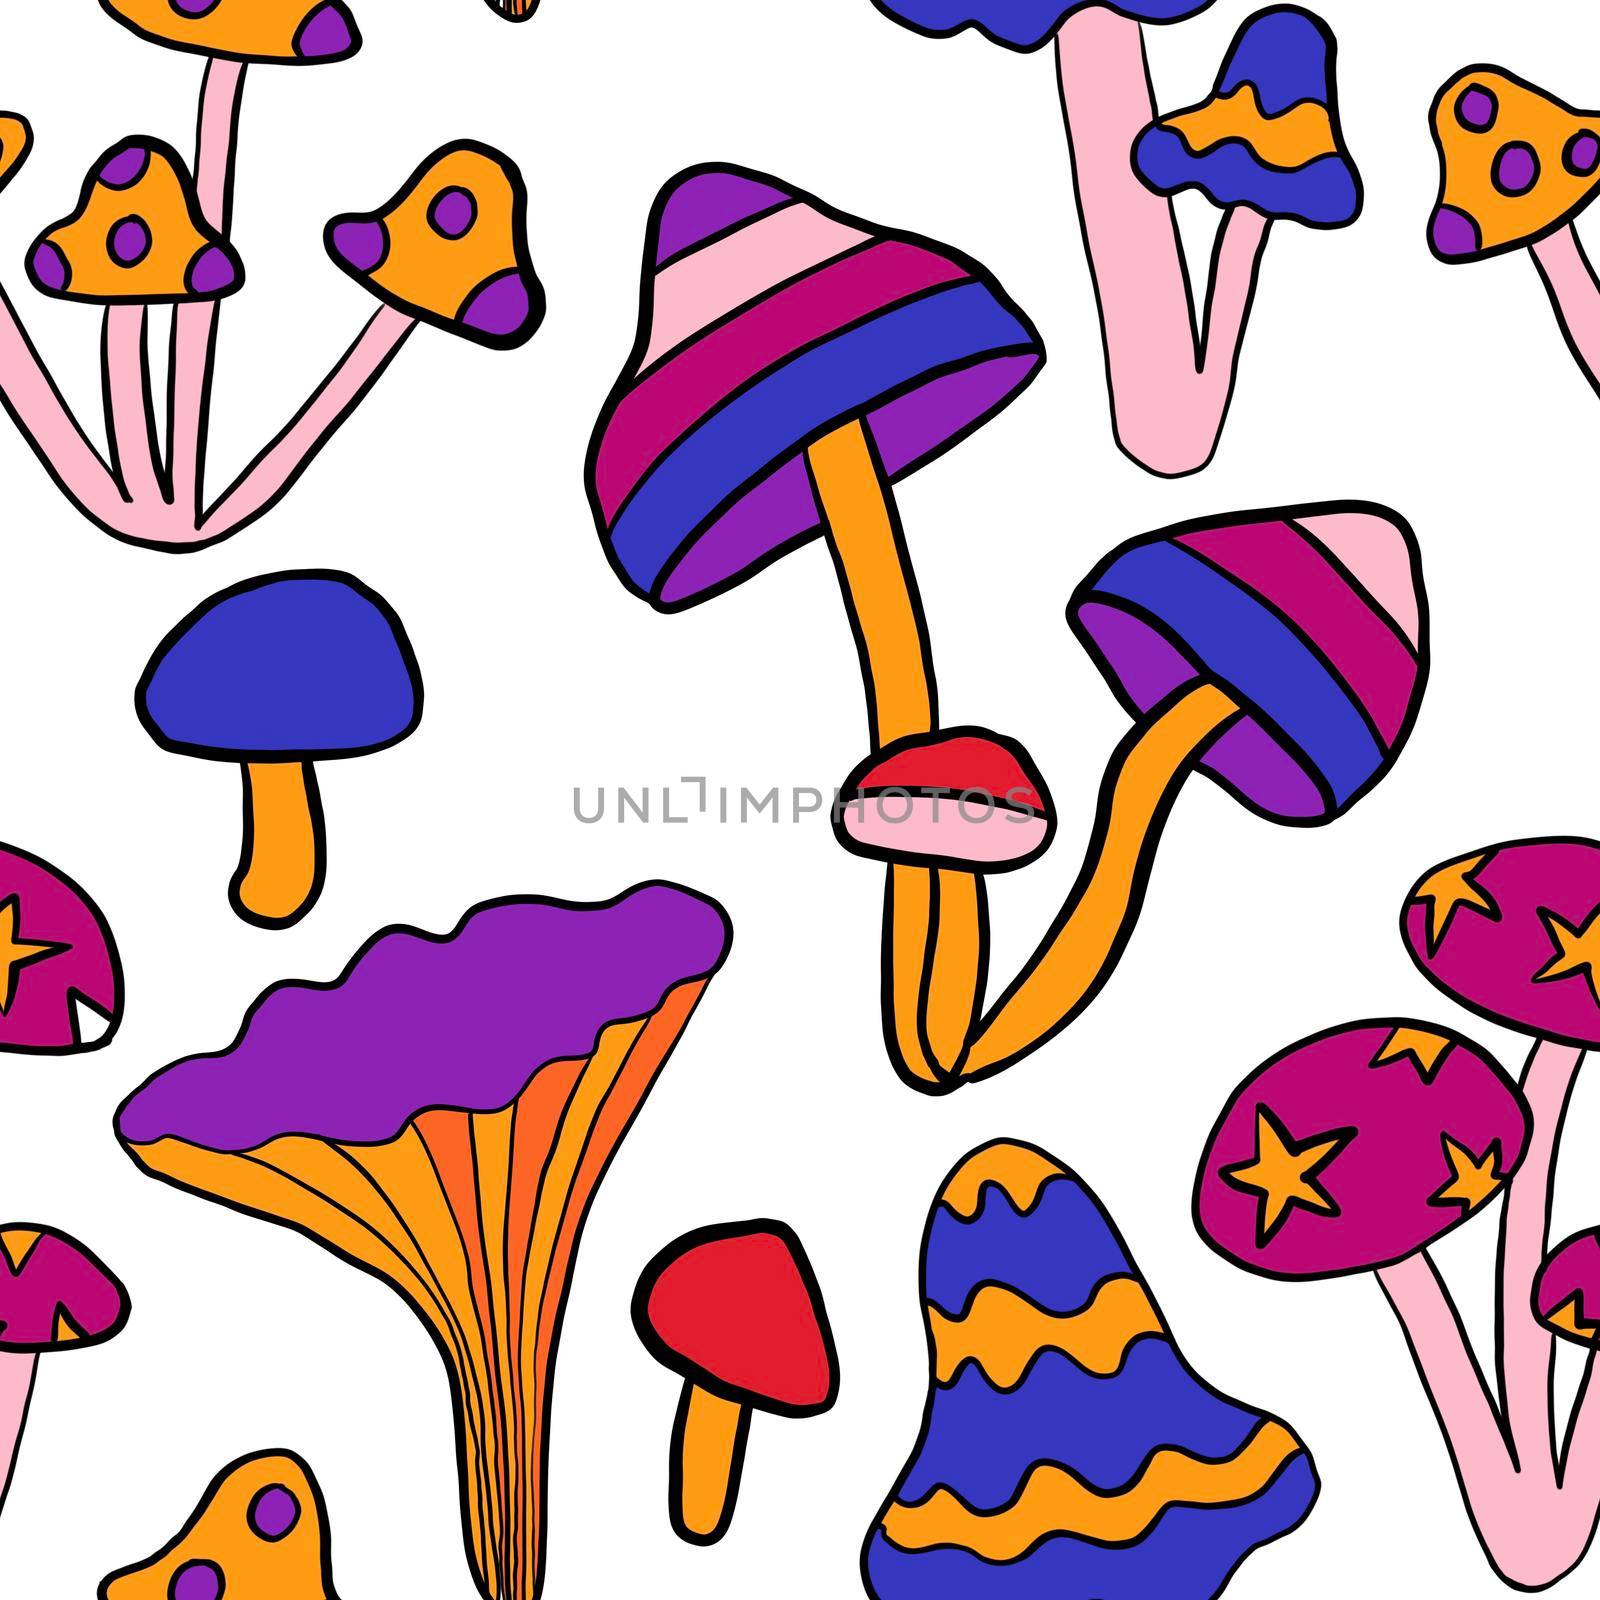 Seamless hand drawn pattern with hippie groovy mushrooms in orange purple blue red colors. Retro vintage 1960s 1970s style, trippy wild bright background with hallucination hypnotic elements